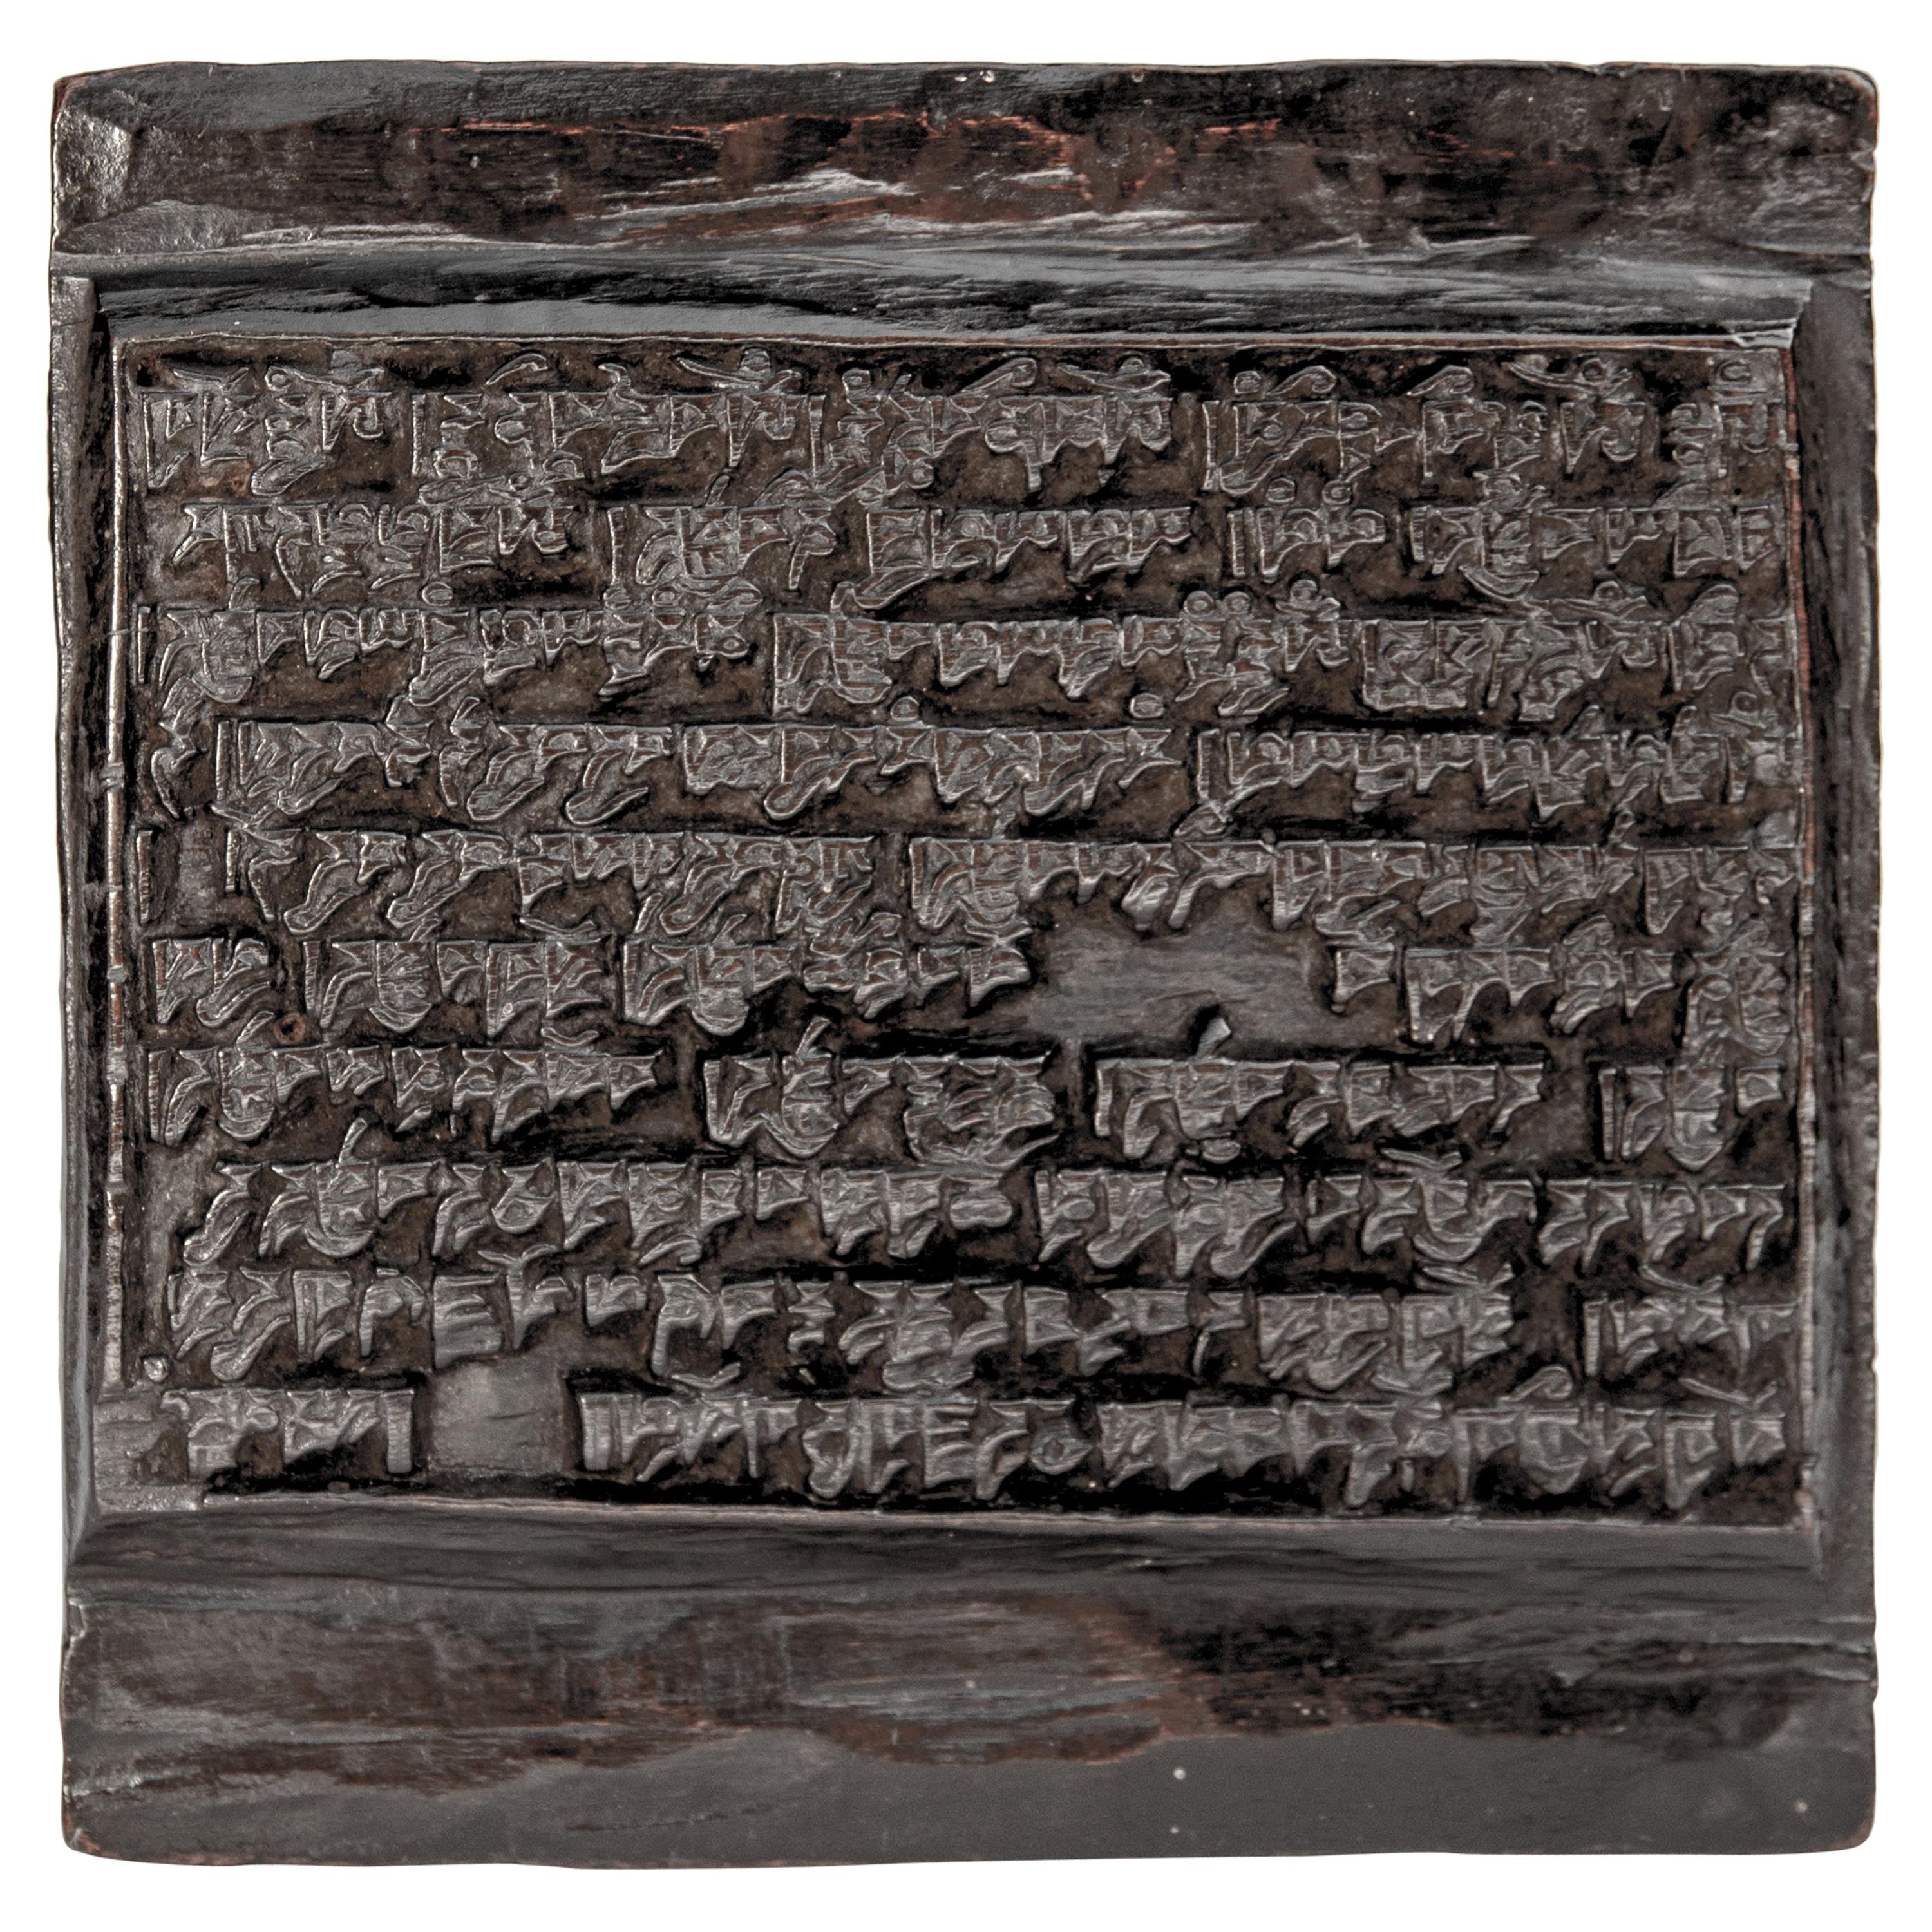 Vintage Wood Print Block Hand Carved Religious Text, Tibet, Early 20th Century